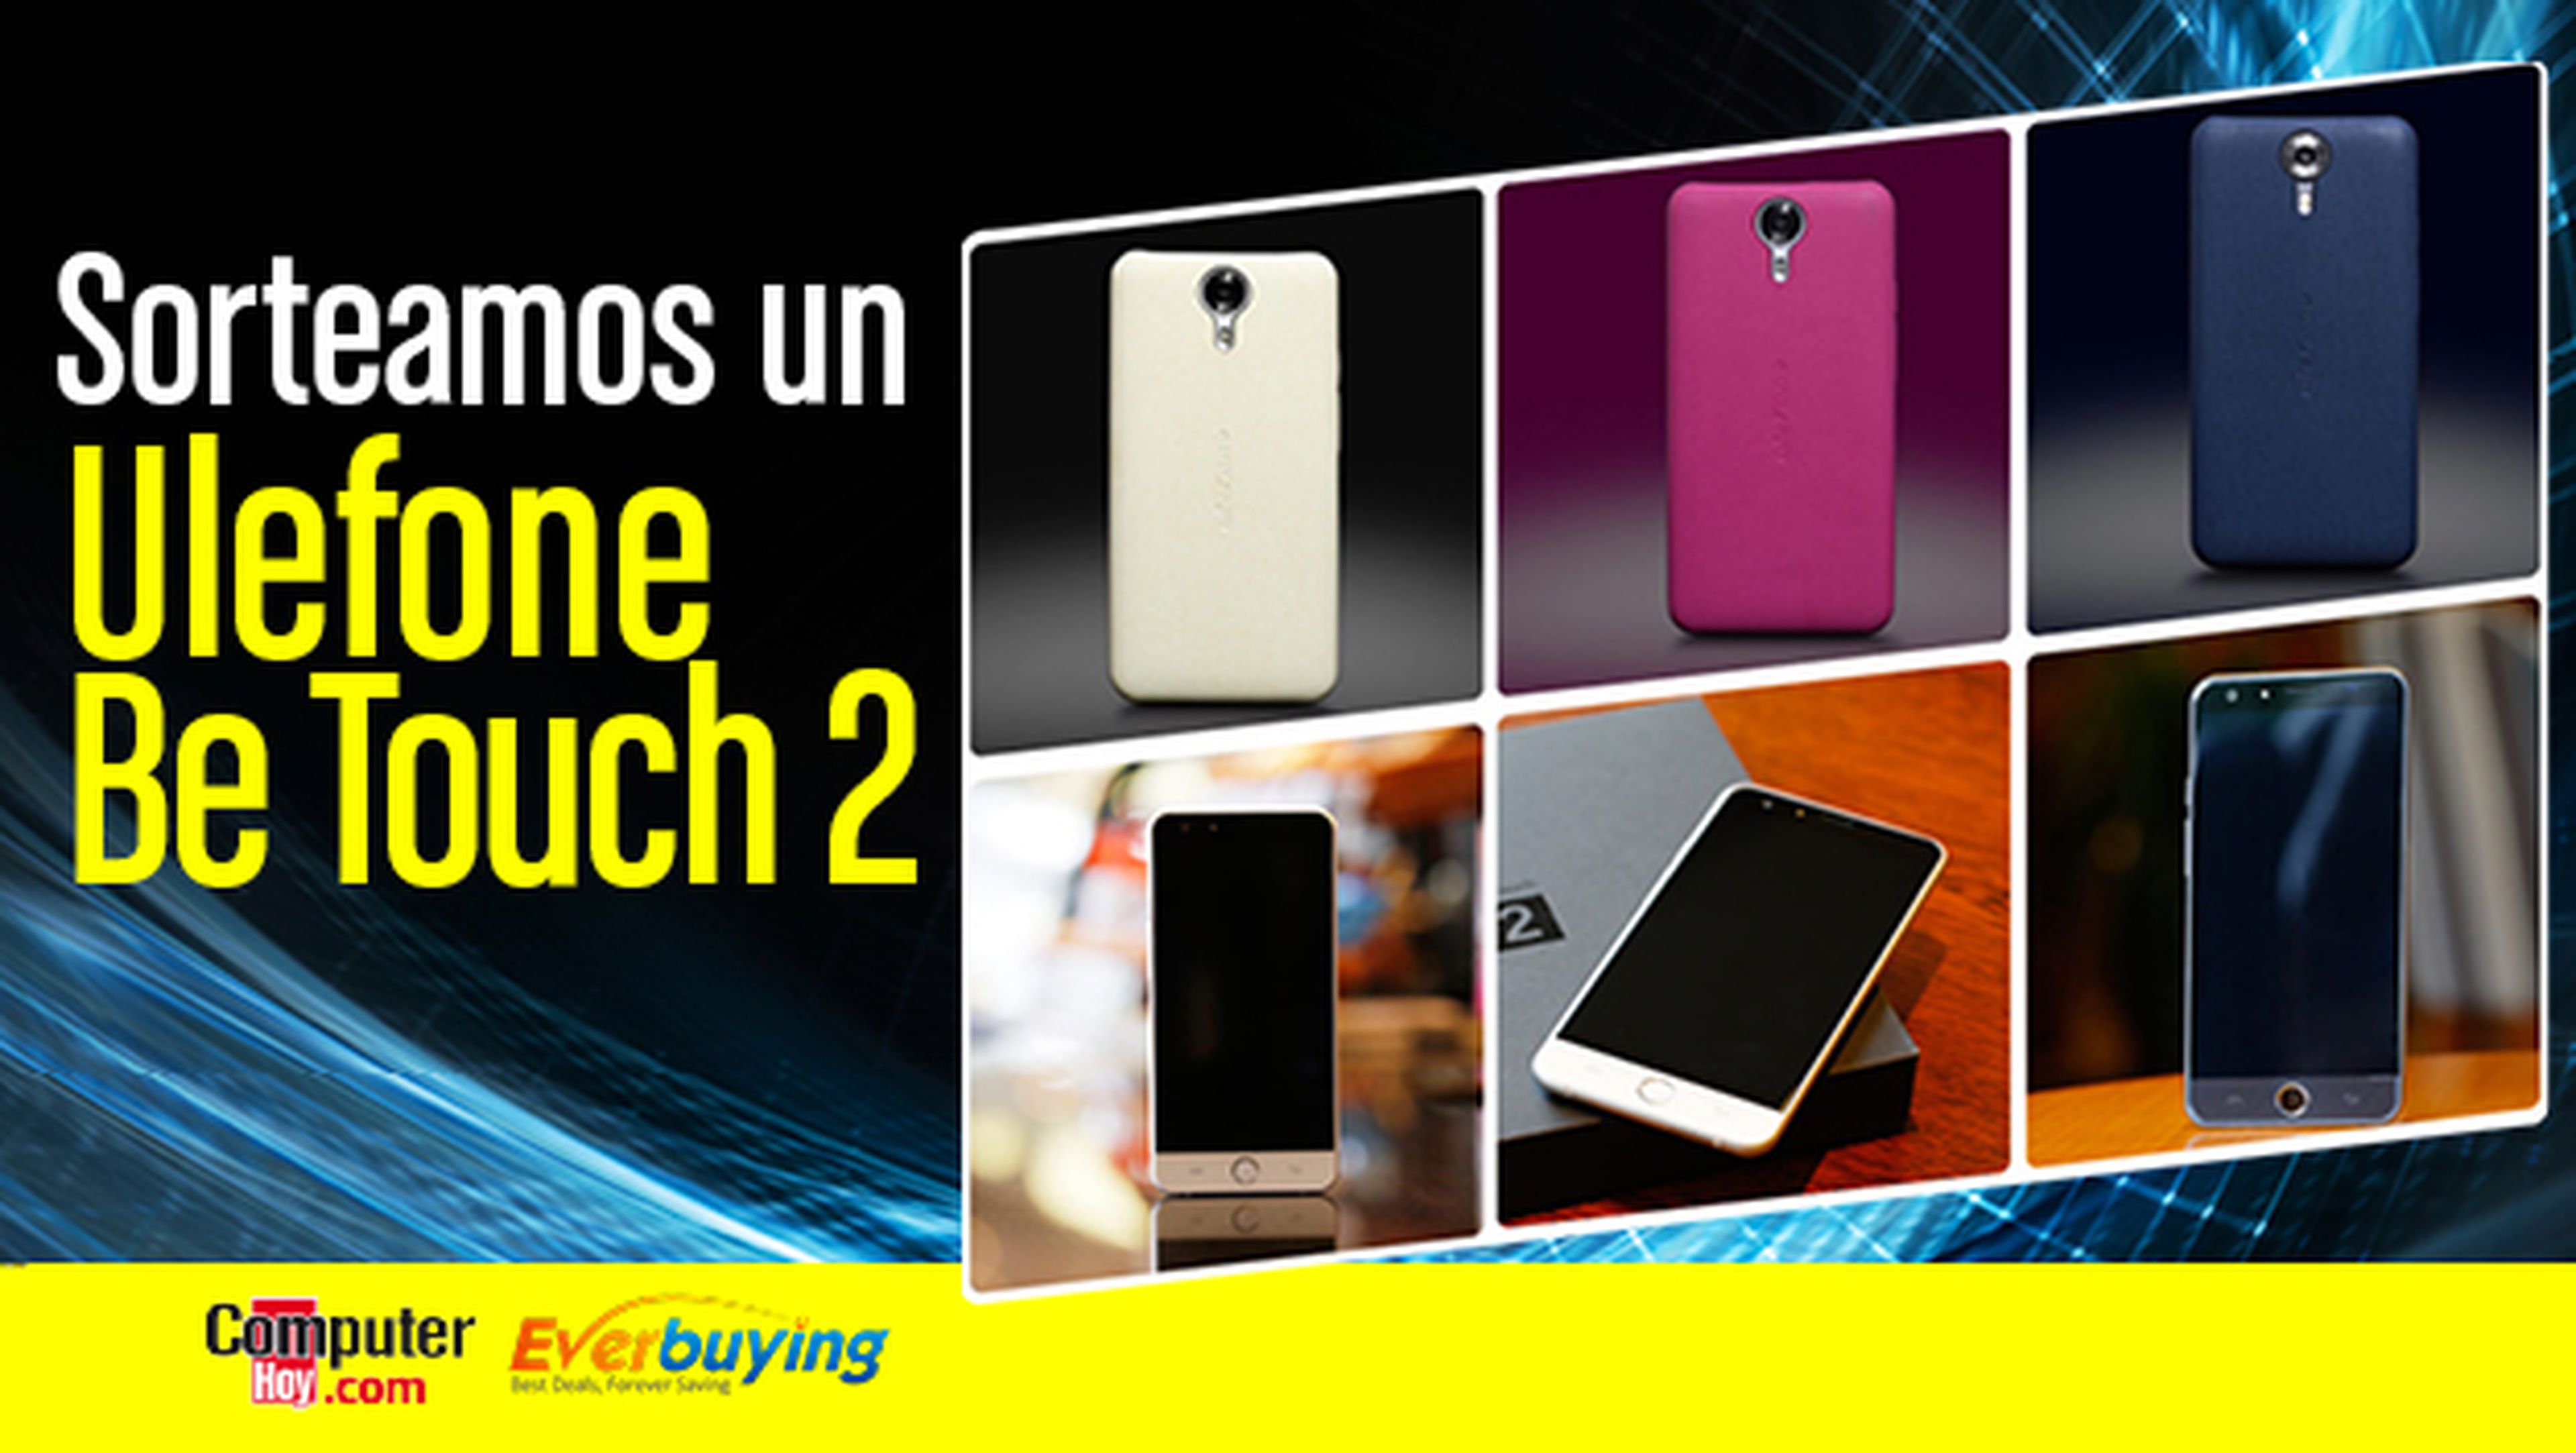 Consigue un Ulefone Be Touch 2 gracias a Everbuying